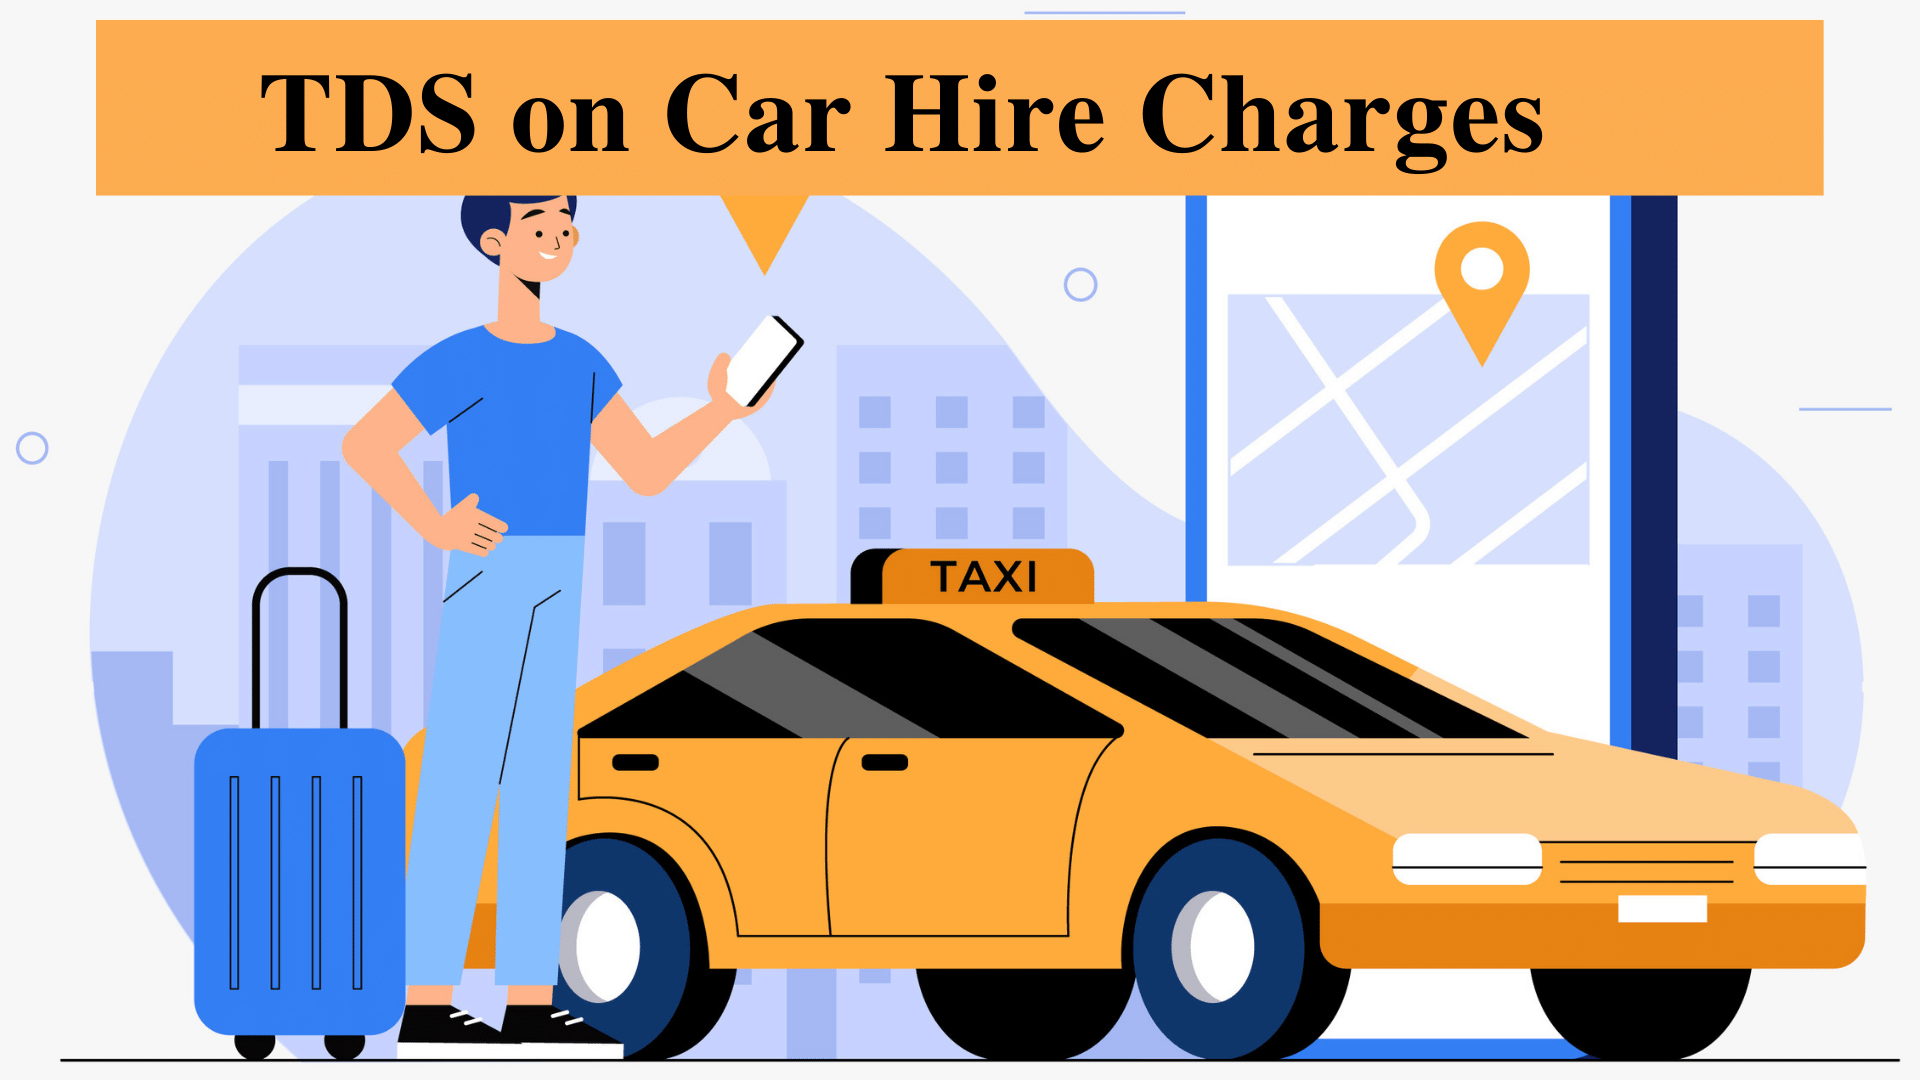 TDS on car hire charges - Section 194C of Income Tax Act